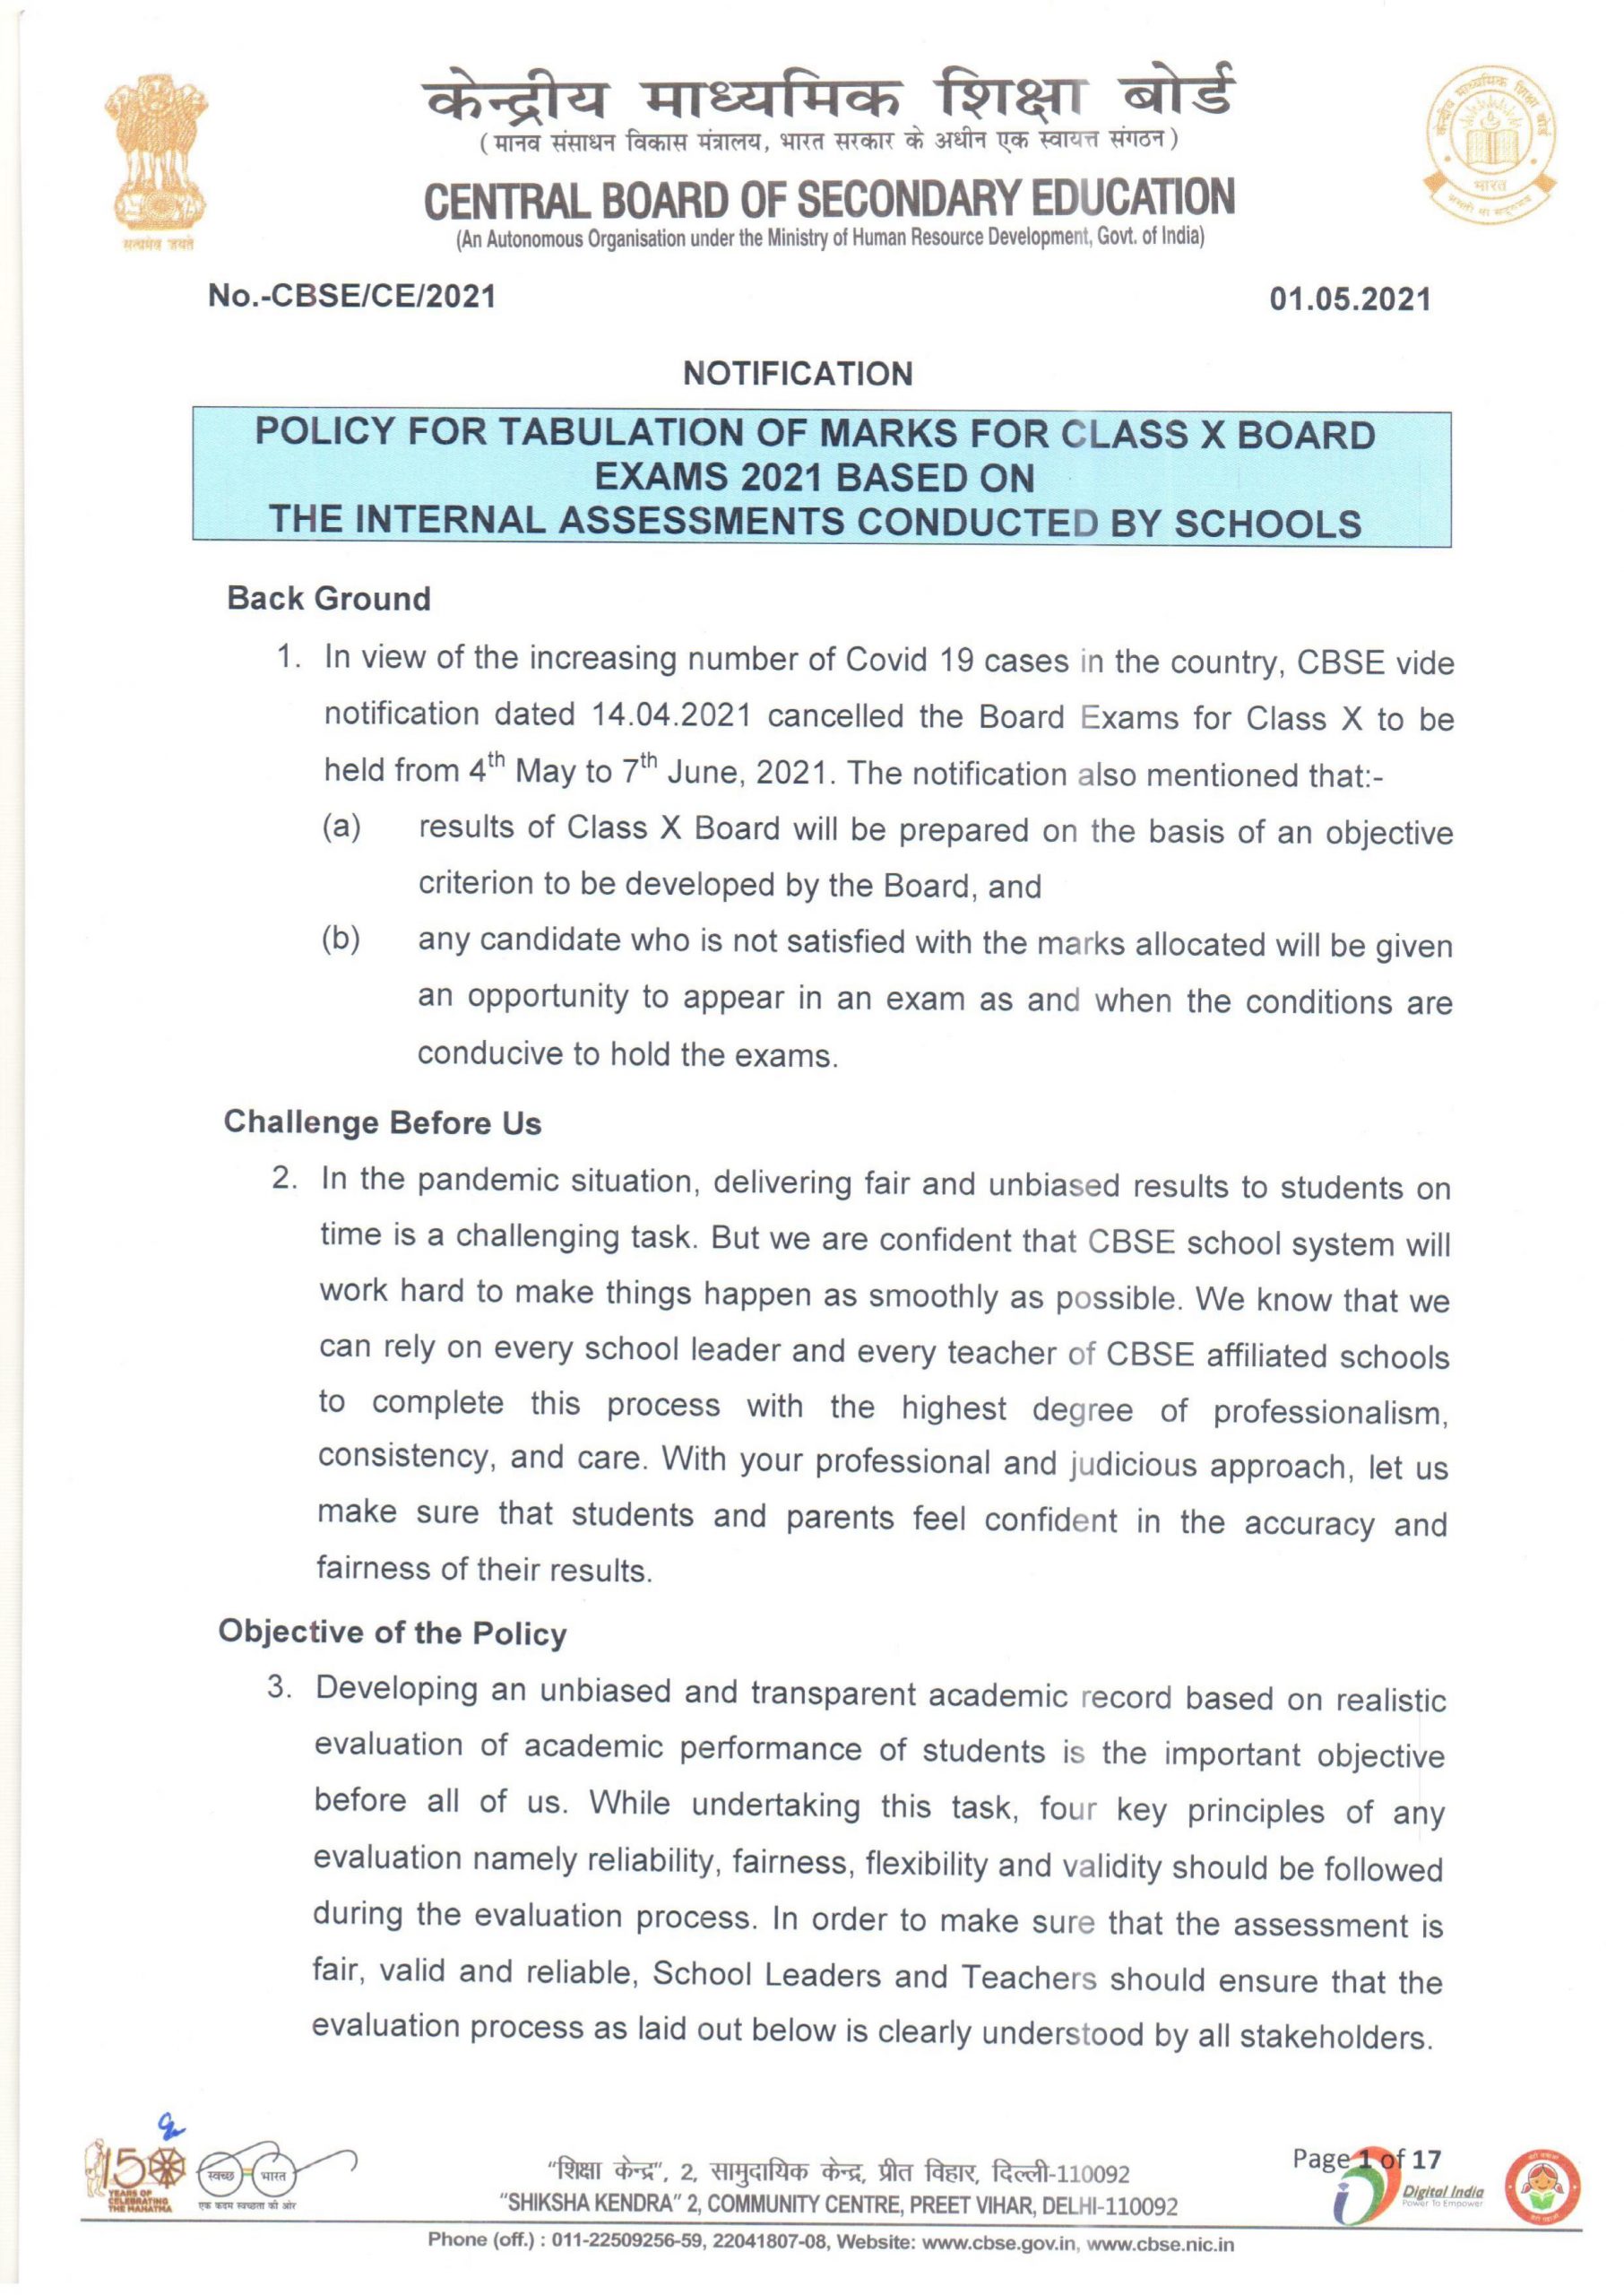 Policy for Tabulation of Marks Class 10 Board Exams 2021 by CBSE